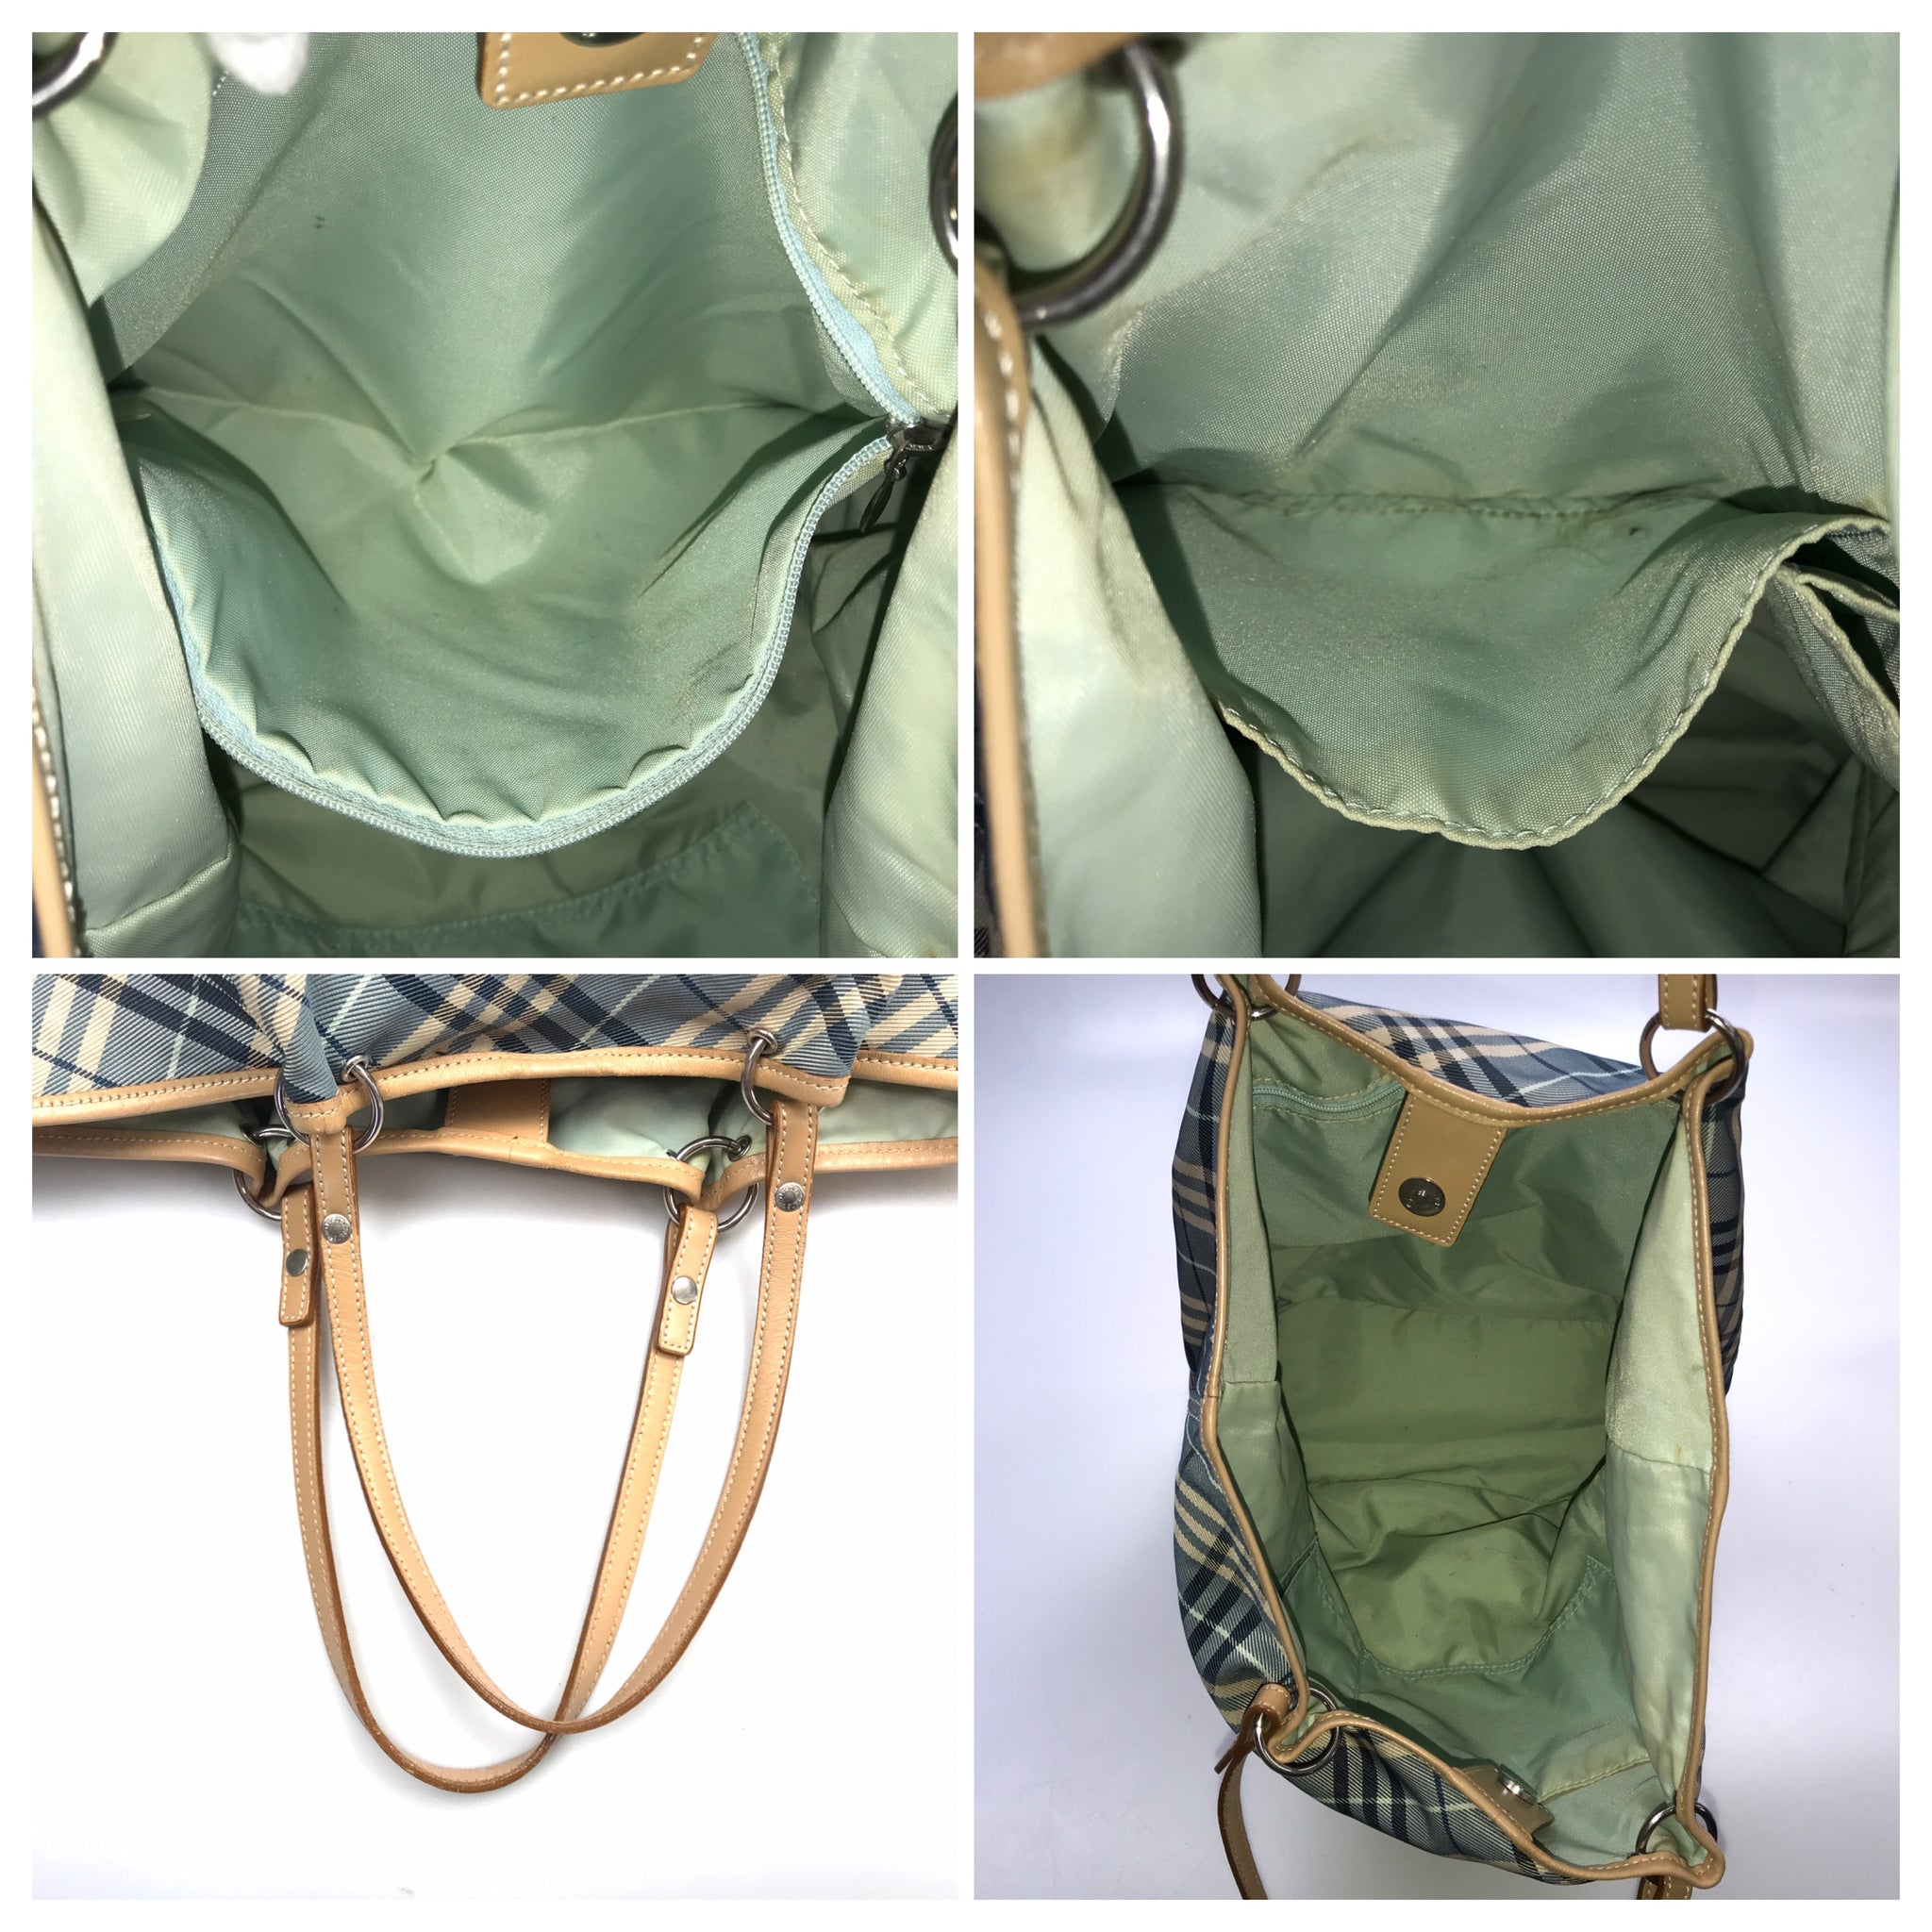 Burberry, Bags, Burberry London Blue Label Pink Tote Bag